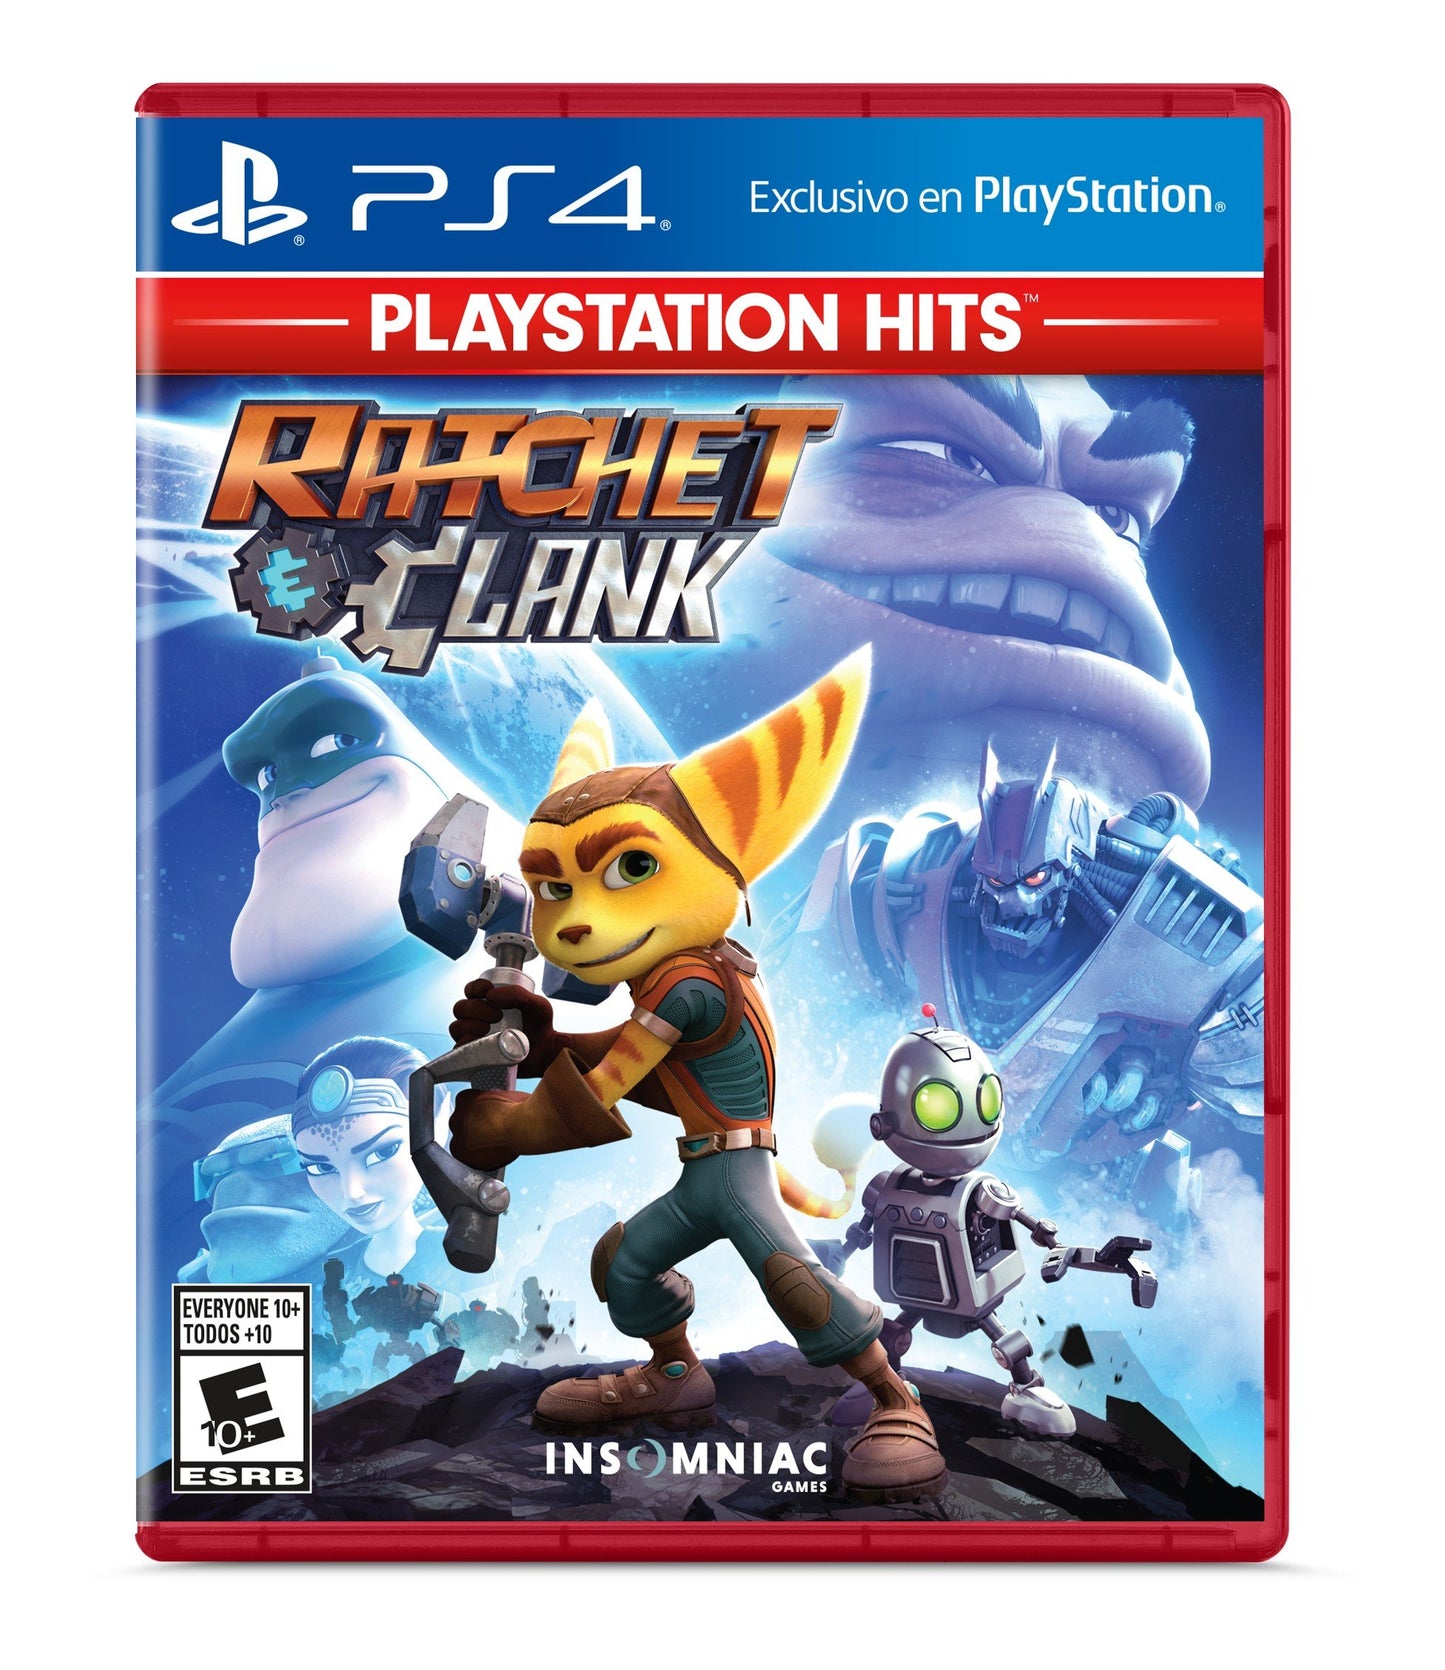 PS4 - Ratchet and Clank Hits - Fisico - Nuevo